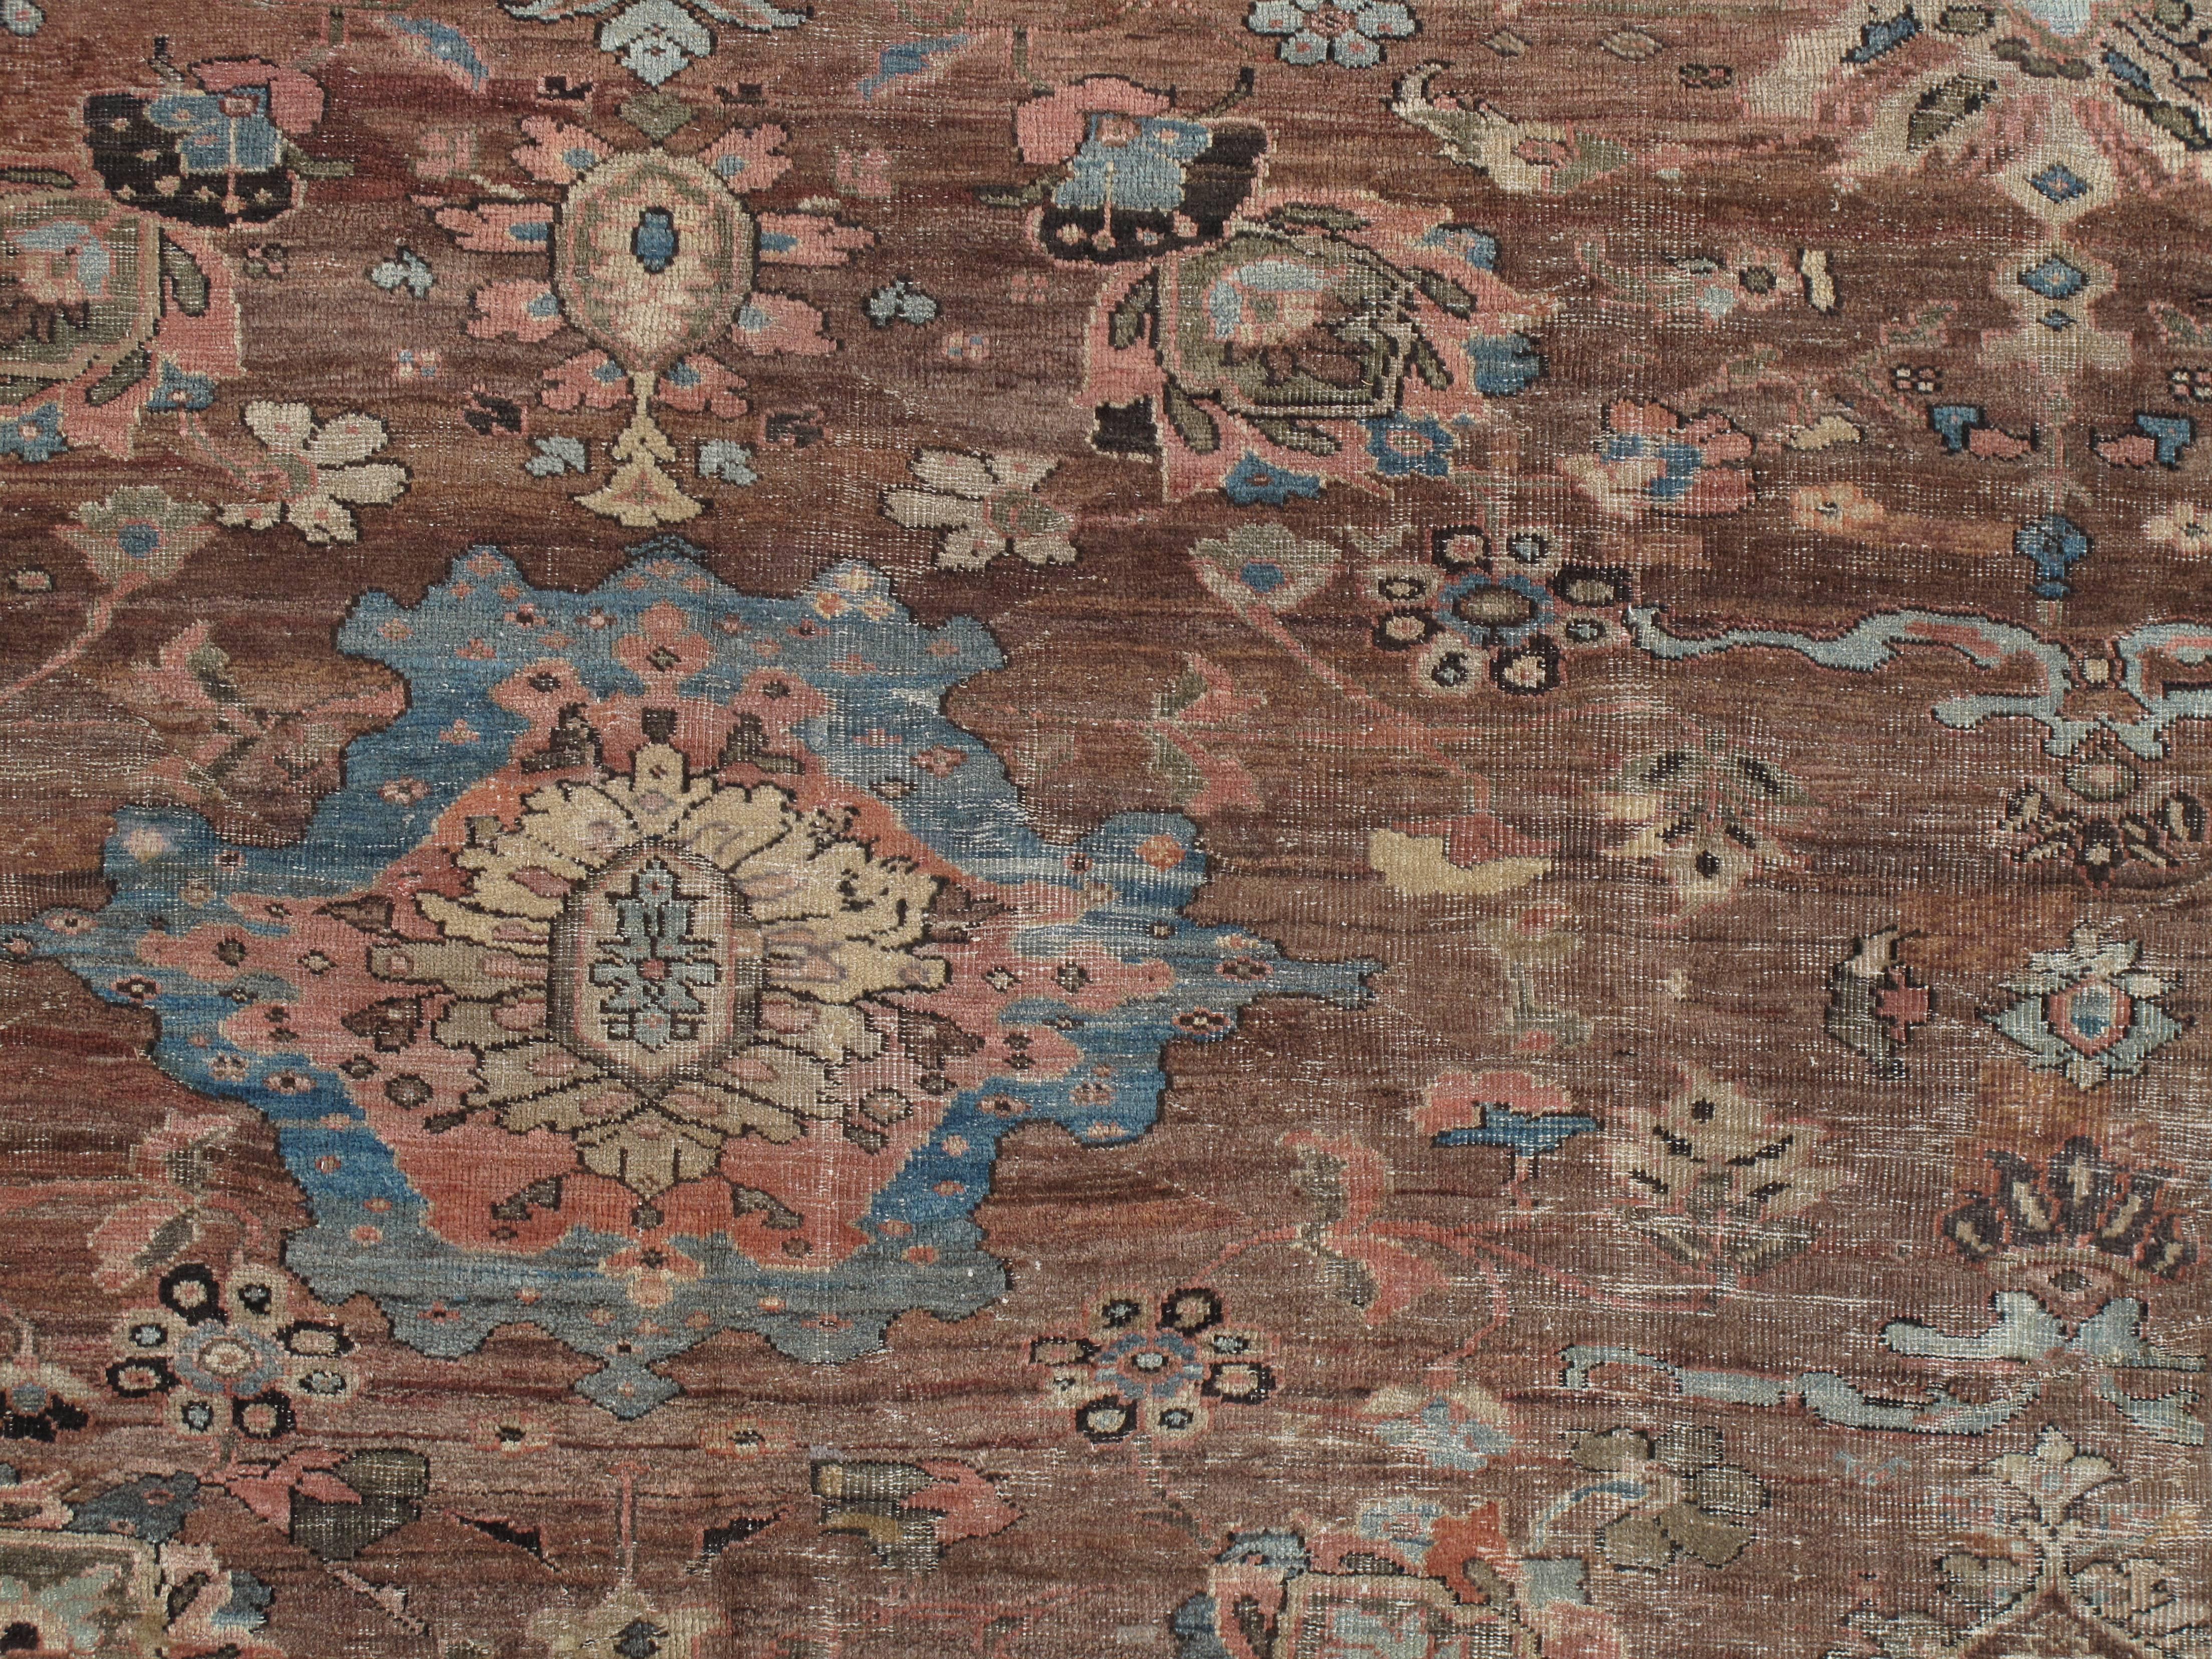 In 1883, Ziegler and Co., of Manchester, England, established a Persian carpet manufacture in Sultanabad, Iran, employing designers from major Western department stores, like B. Altman and Liberty of London, to modify fanciful 16th-17th-century